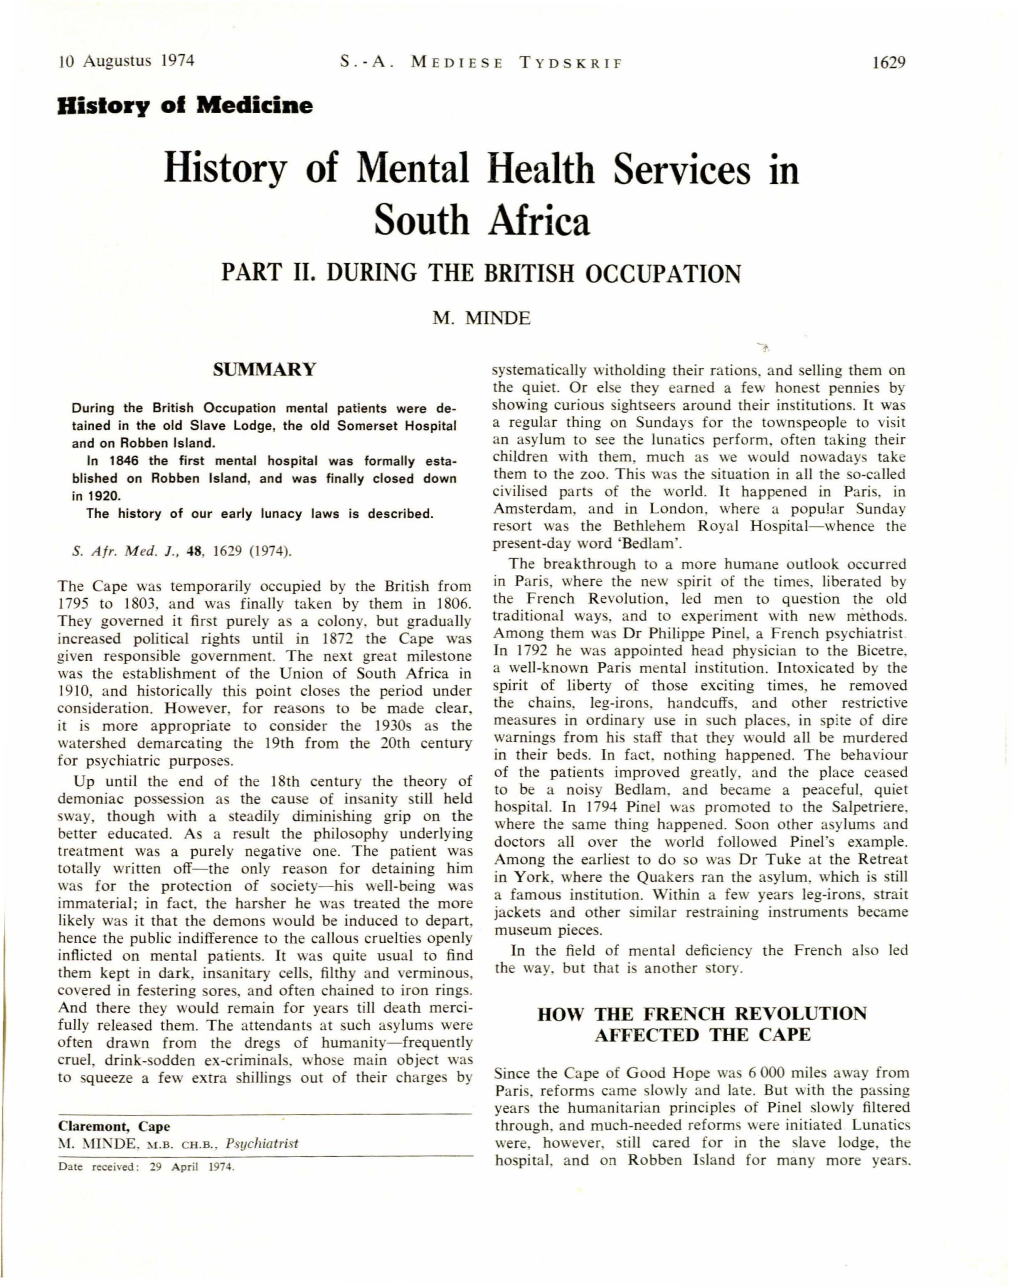 History of Mental Health Services South Africa